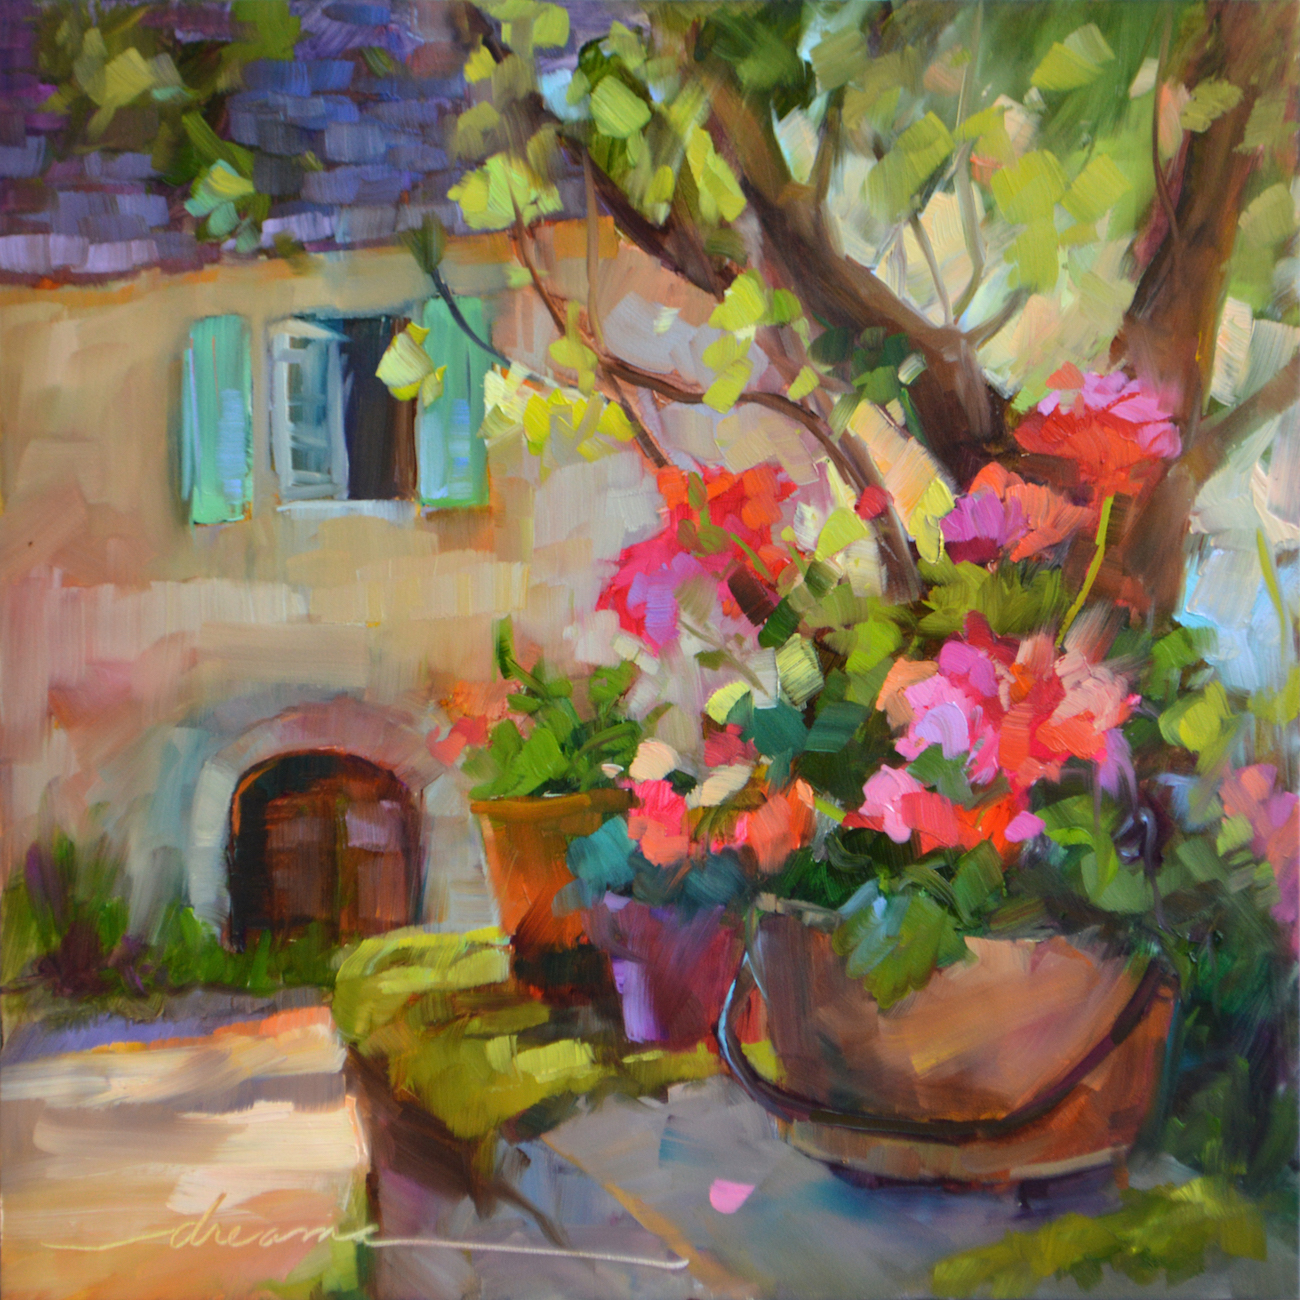 "Sunny Beginnings" Artist Dreama Tolle Perry